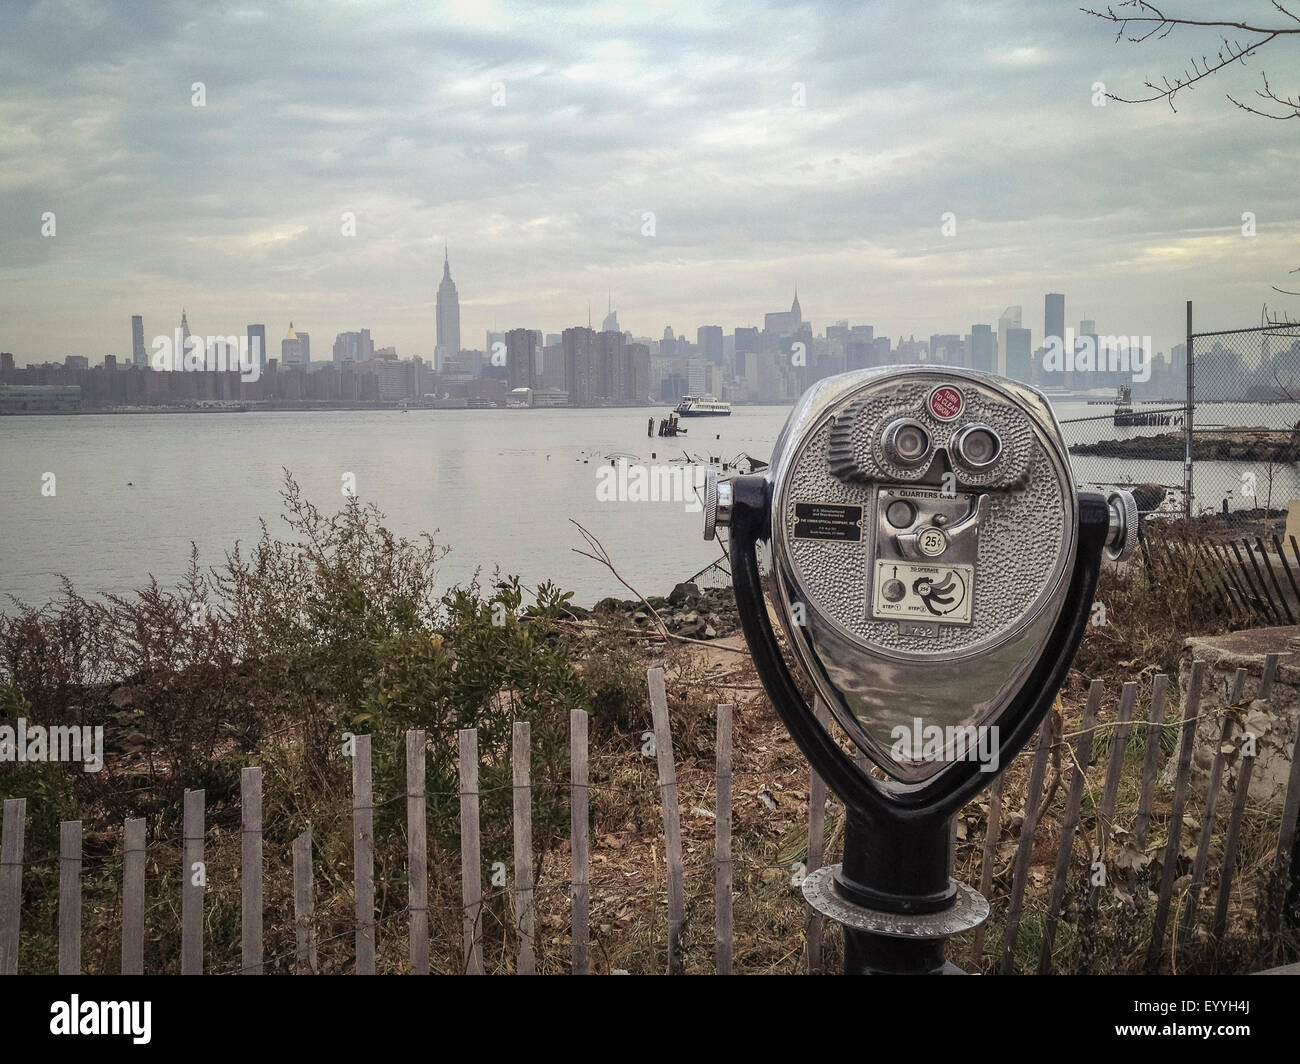 Coin-operated binoculars viewing city skyline on urban waterfront Stock Photo